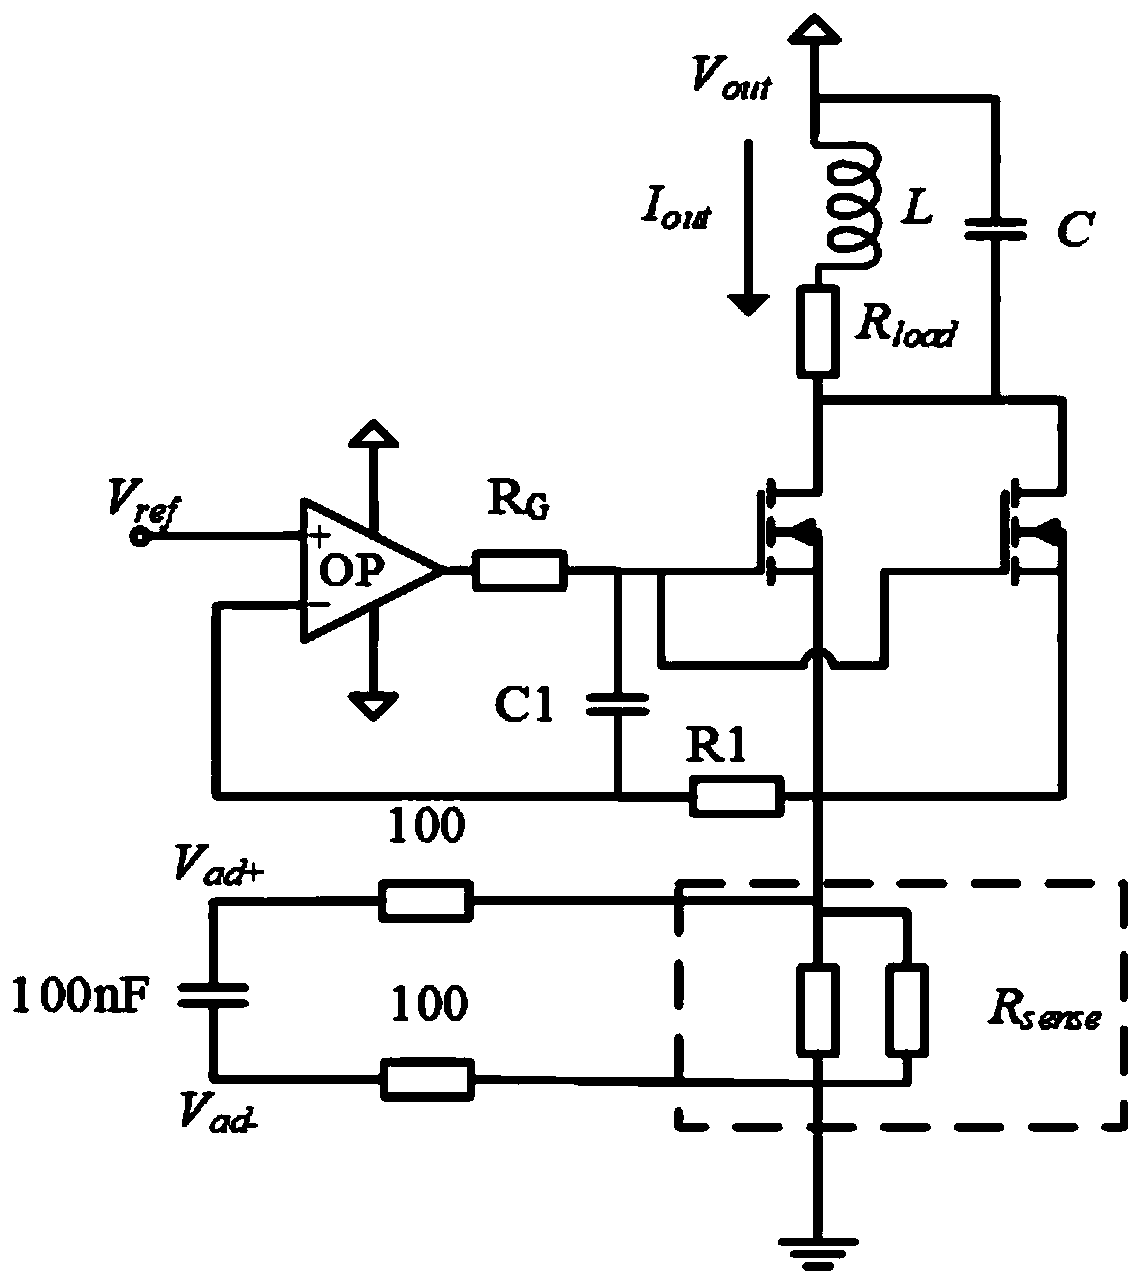 High-precision voltage regulation type constant current source system suitable for strong inductive load